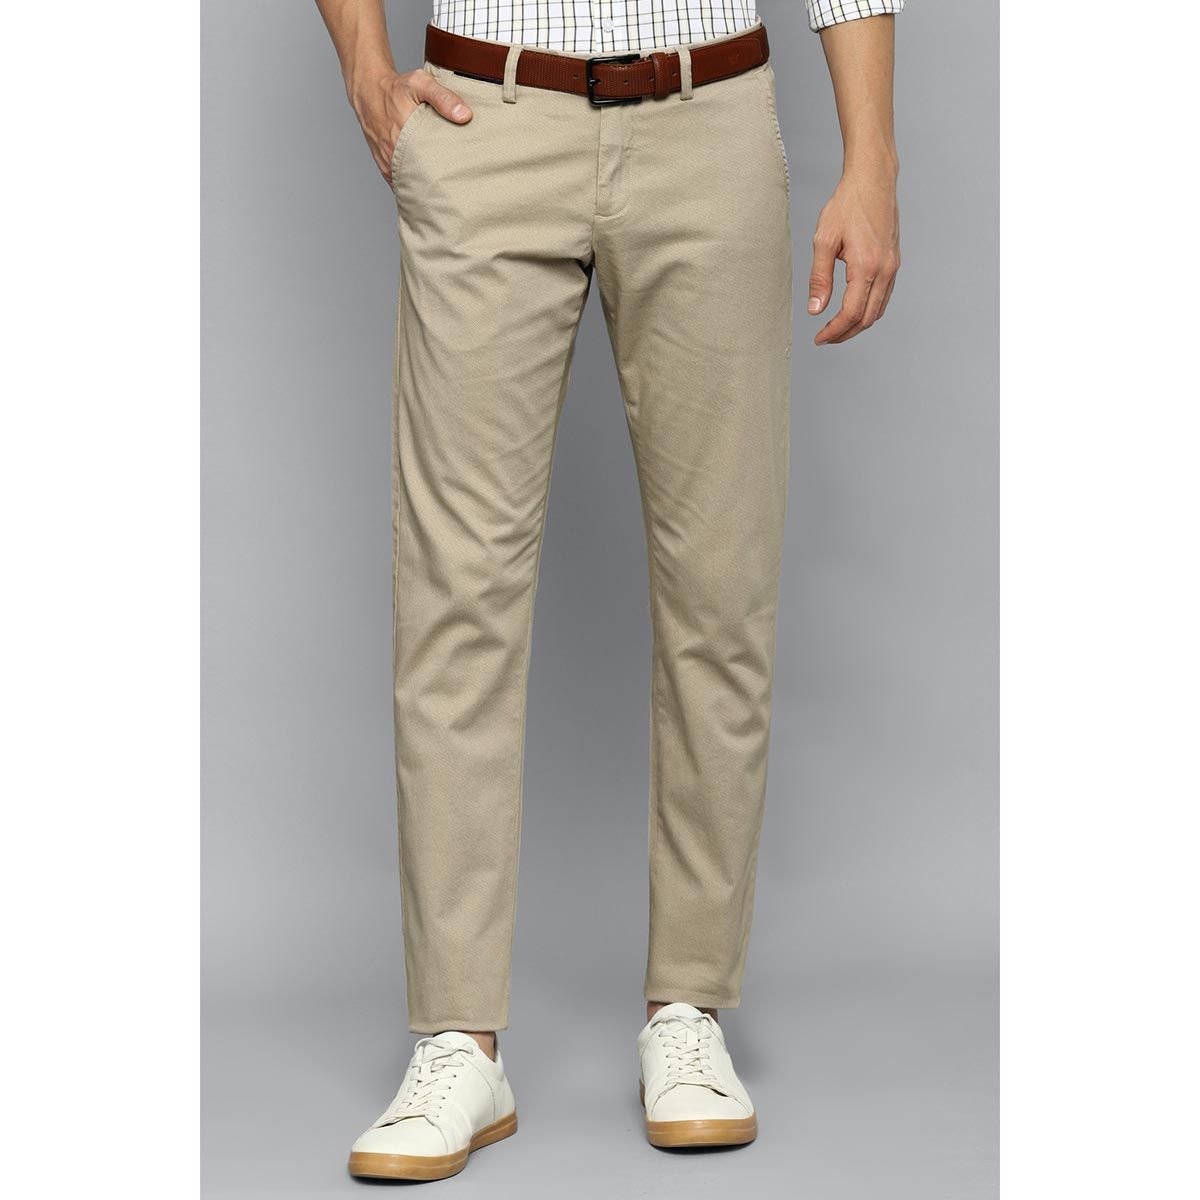 Allen Solly Khaki Trousers Buy Allen Solly Khaki Trousers Online at Best Price  in India  NykaaMan